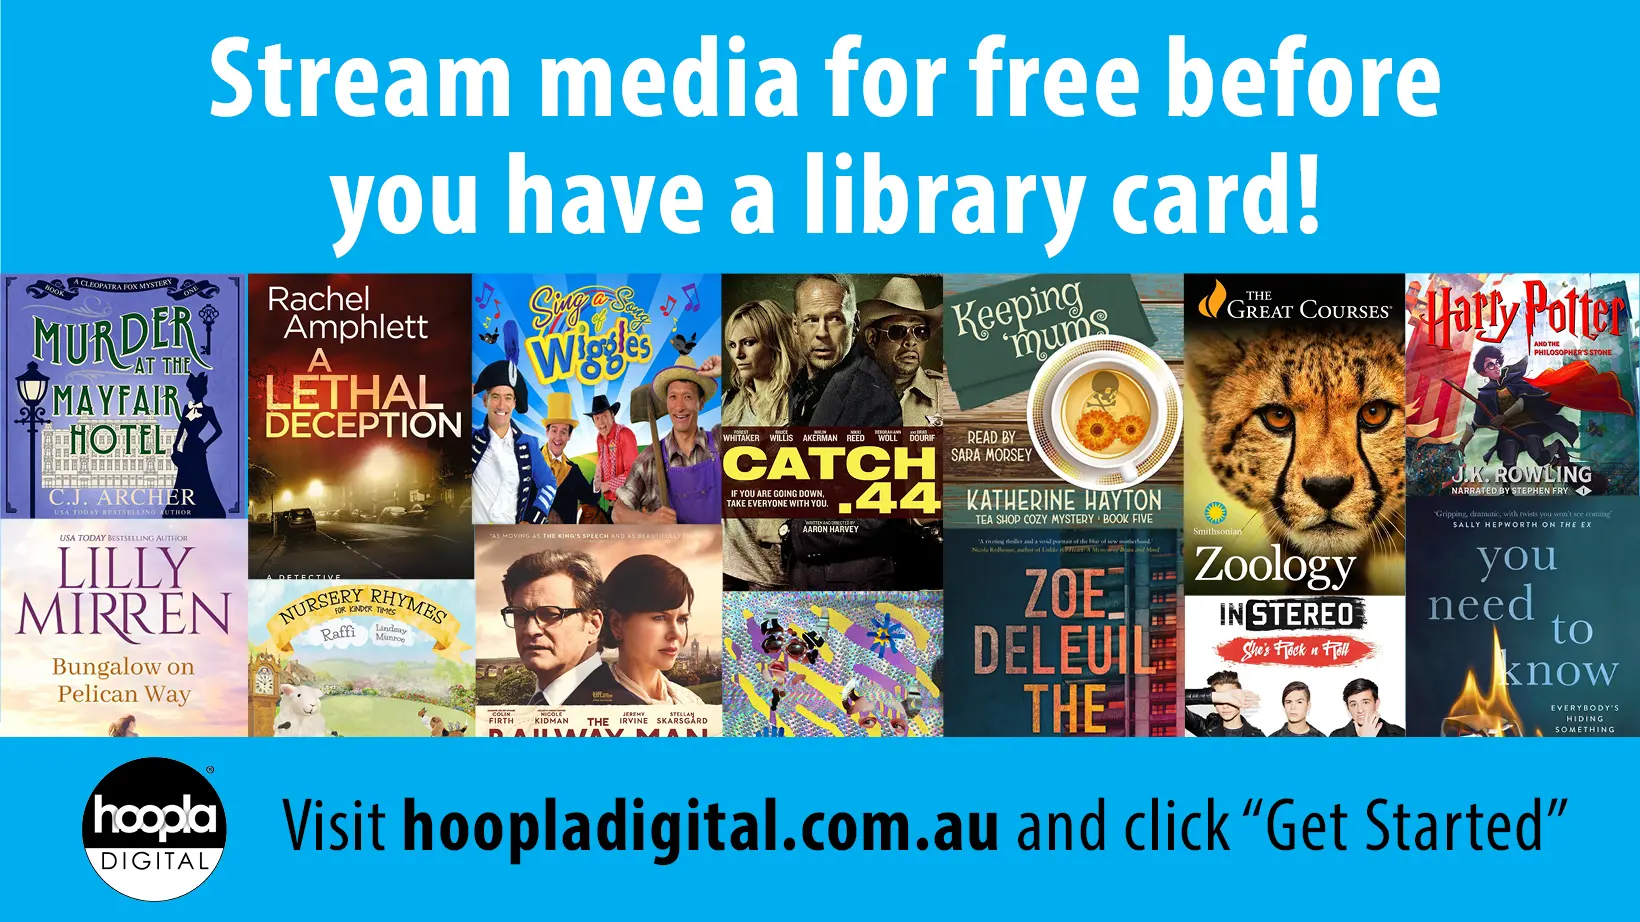 Promotional material advising you can access hoopla without a library card.